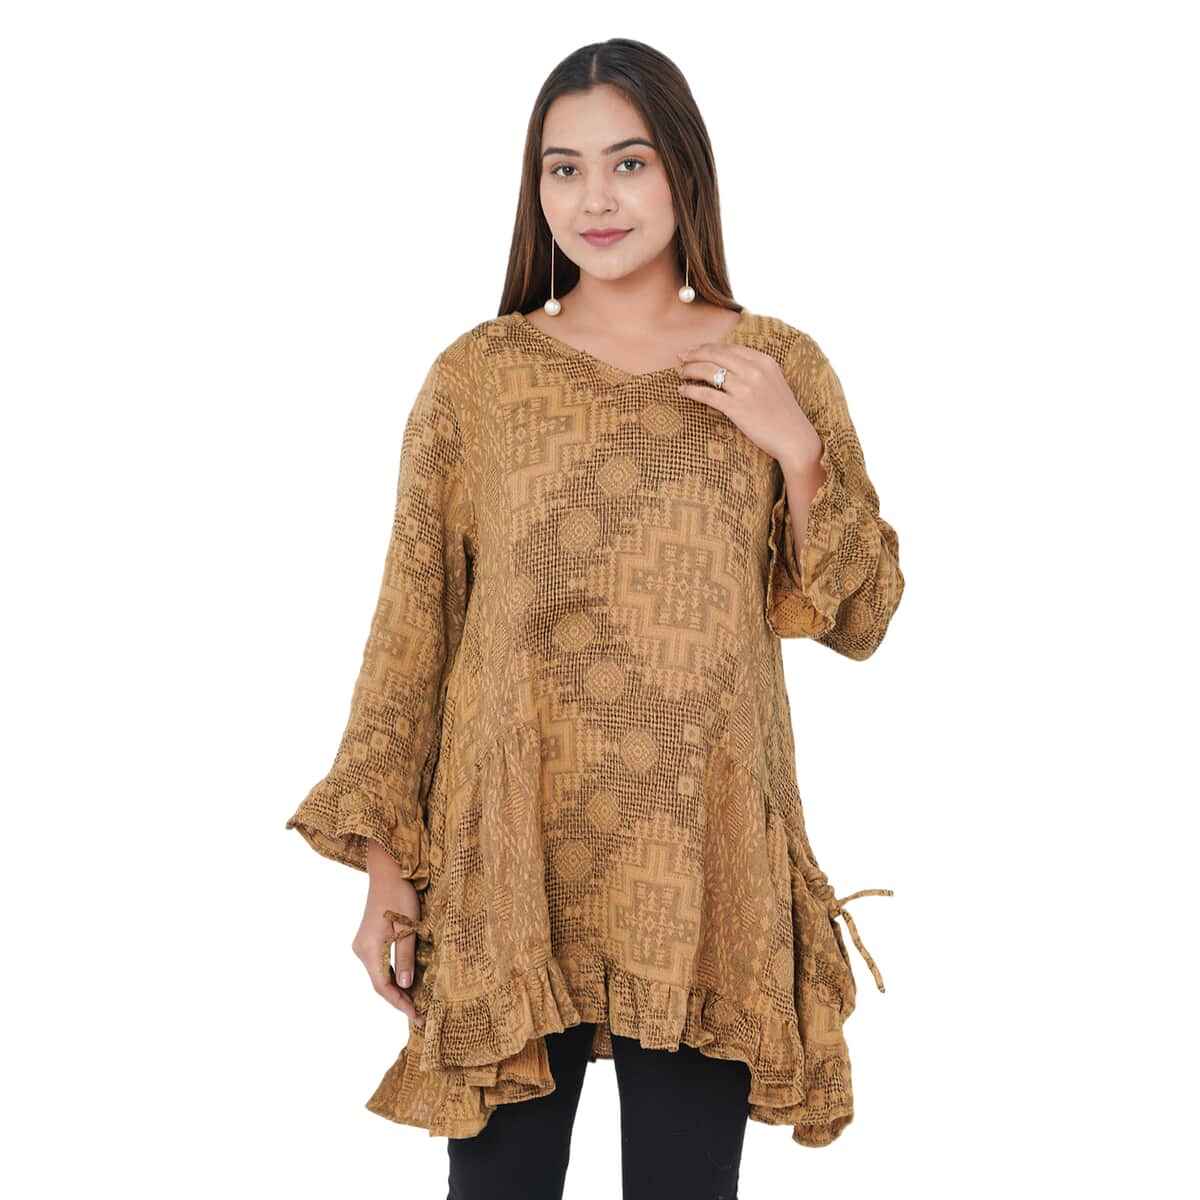 Tamsy Gold 100% Cotton Double Layer Jacquard Ruffle Hem Top - L/XL image number 2